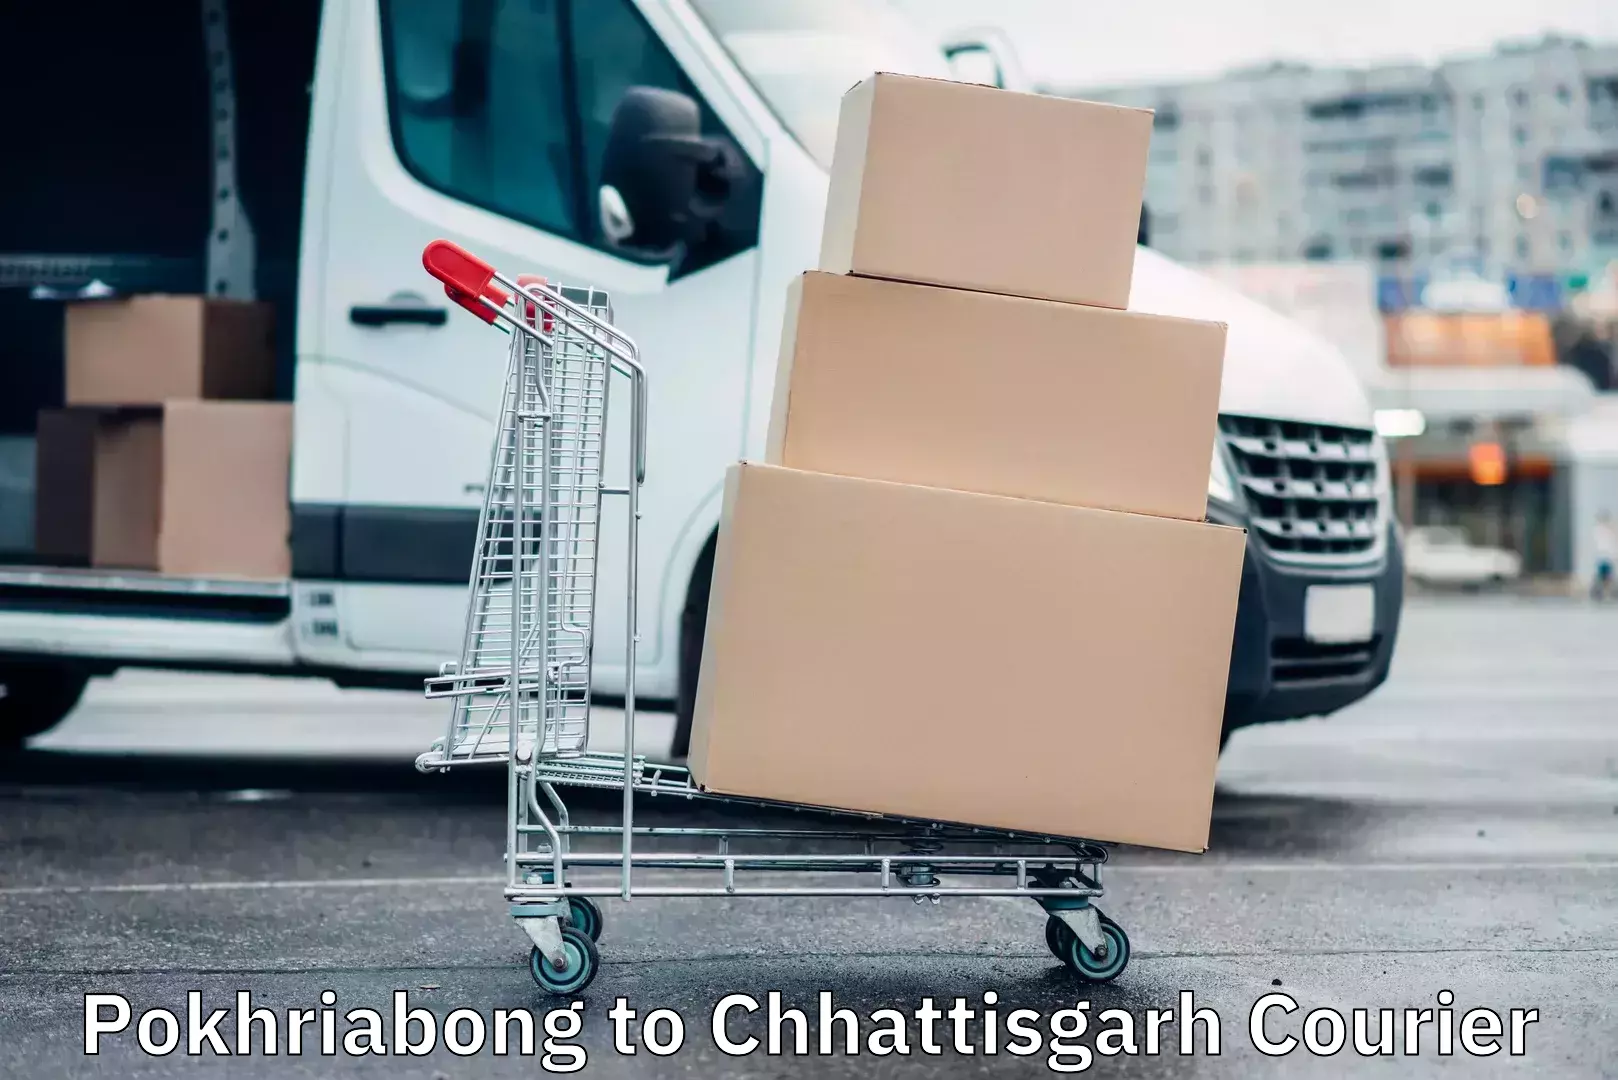 Efficient parcel tracking in Pokhriabong to Chhattisgarh